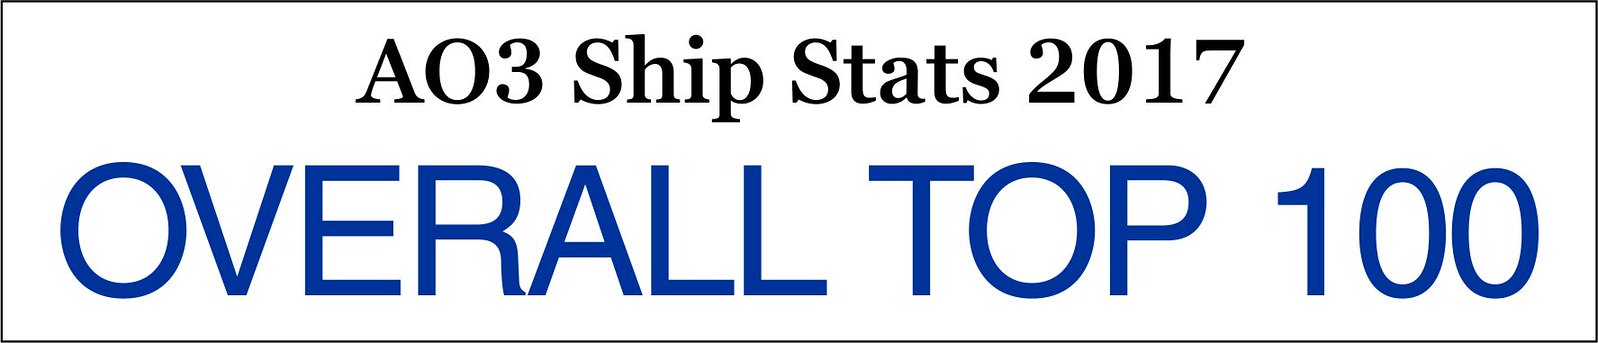 Banner reading "AO3 Ship Stats 2017: Overall Top 100)